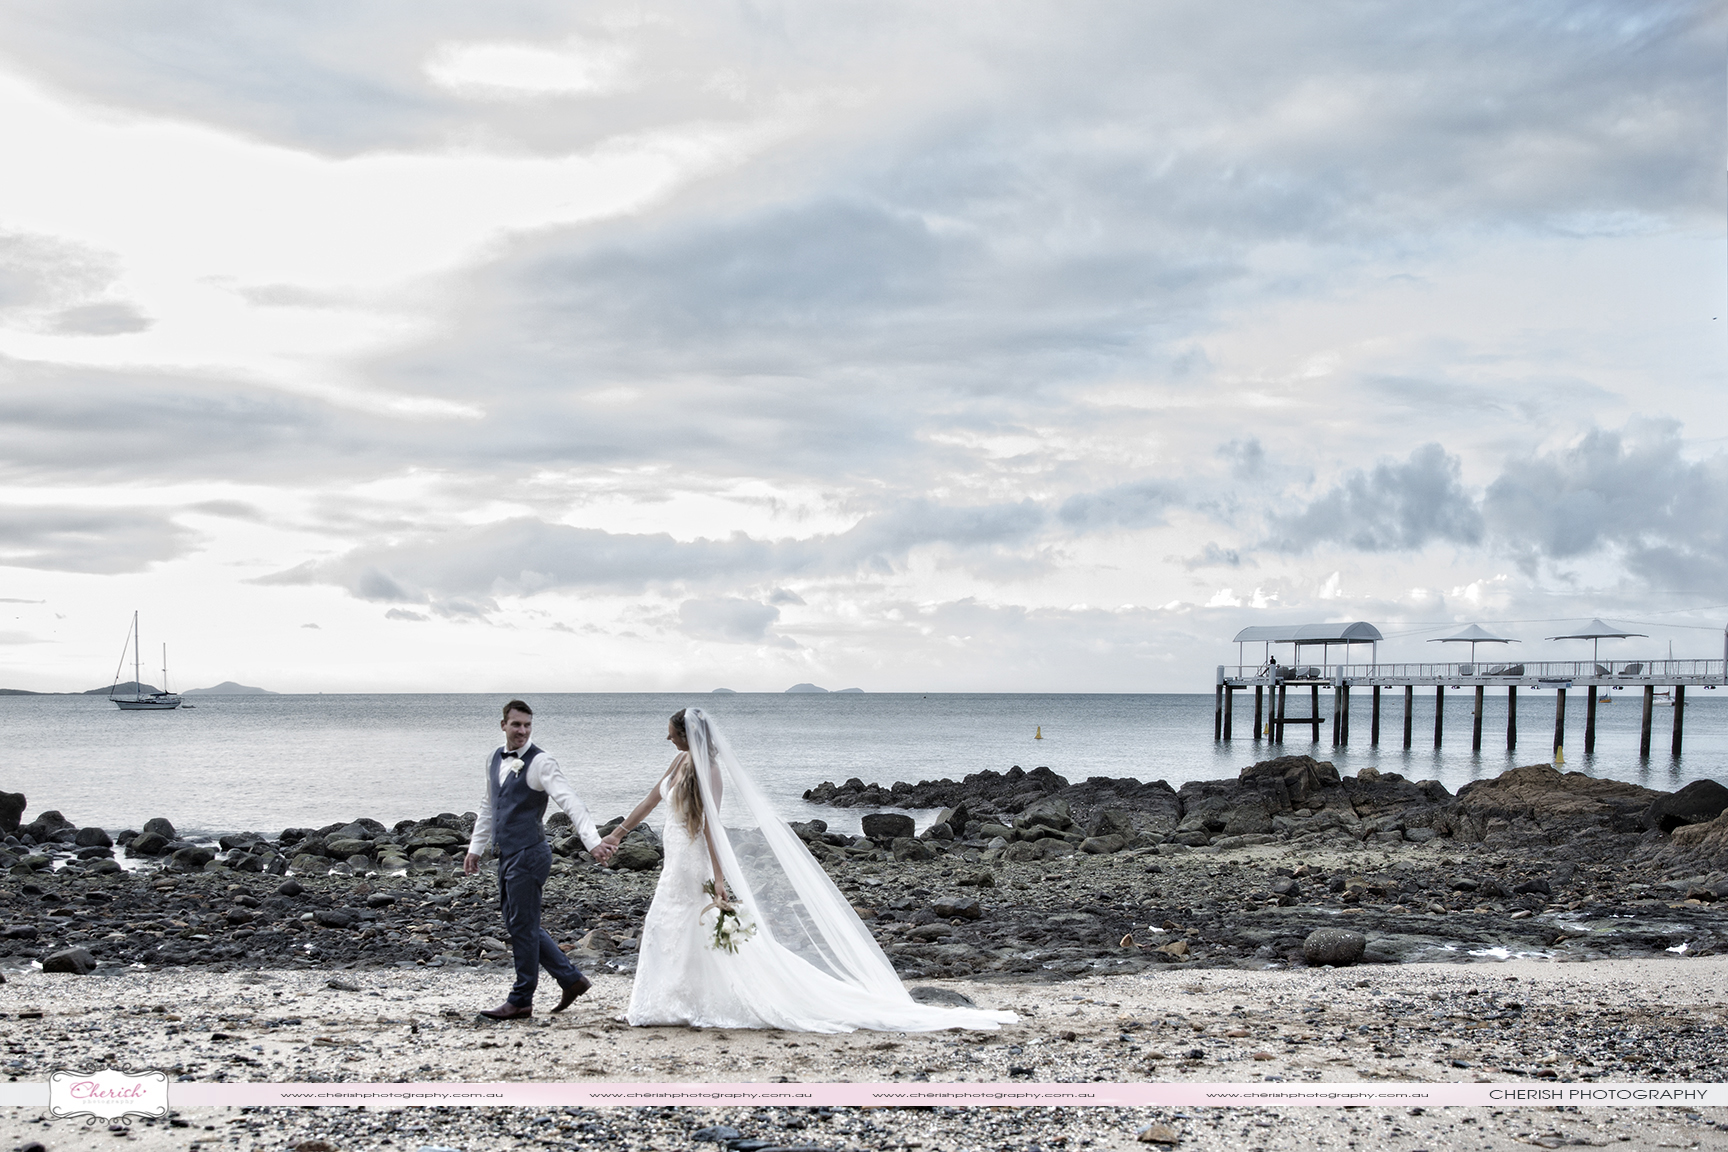 A bride and groom walking on the beach near the Coral Sea Resort in Airlie Beach QLD - artistic wedding photography.